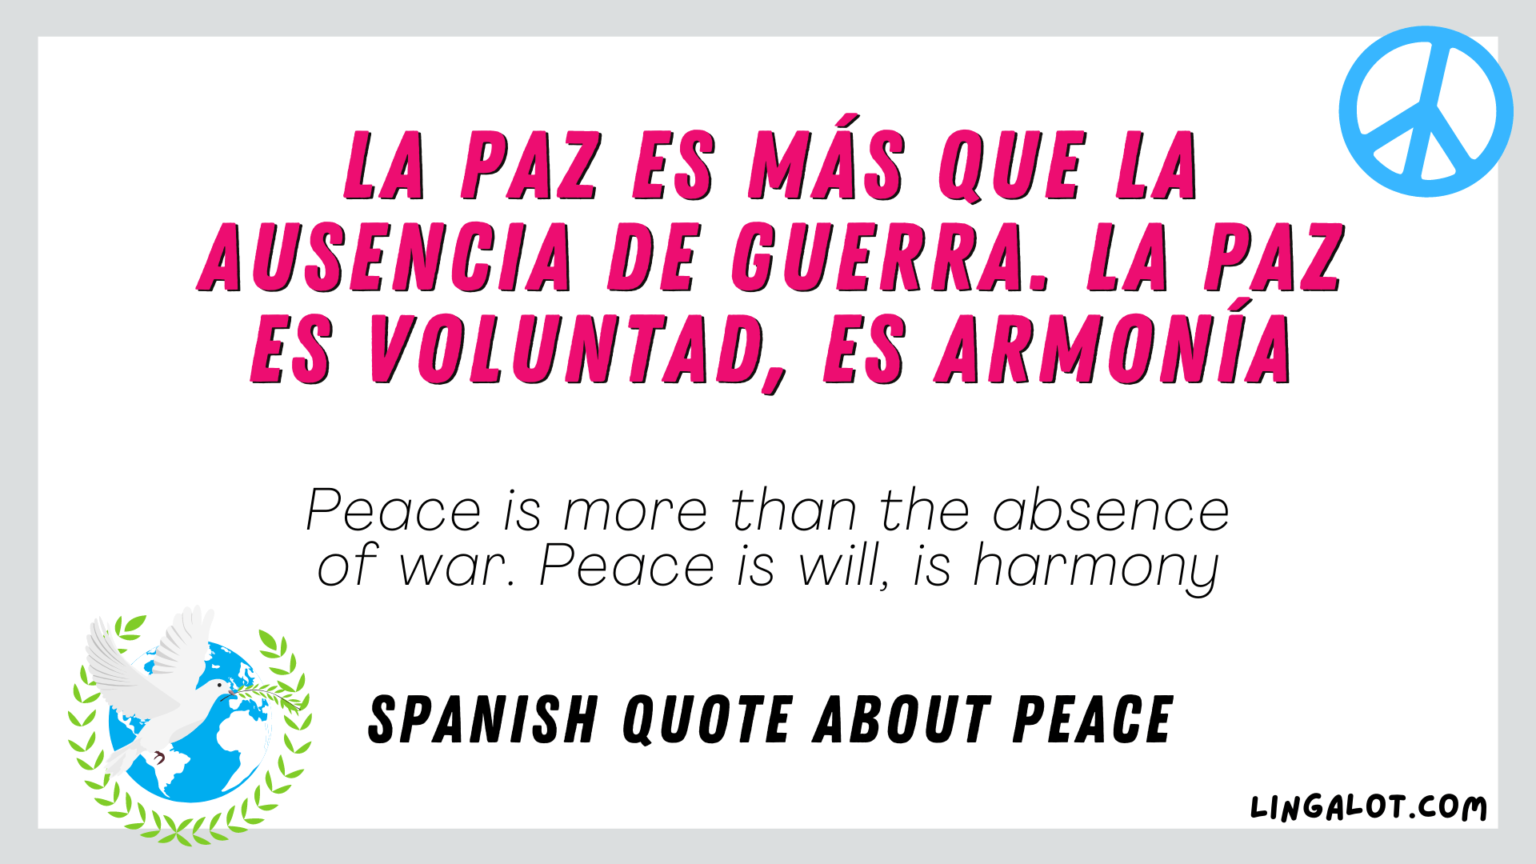 70+ Spanish Quotes About Peace (And Their English Translation)  Lingalot